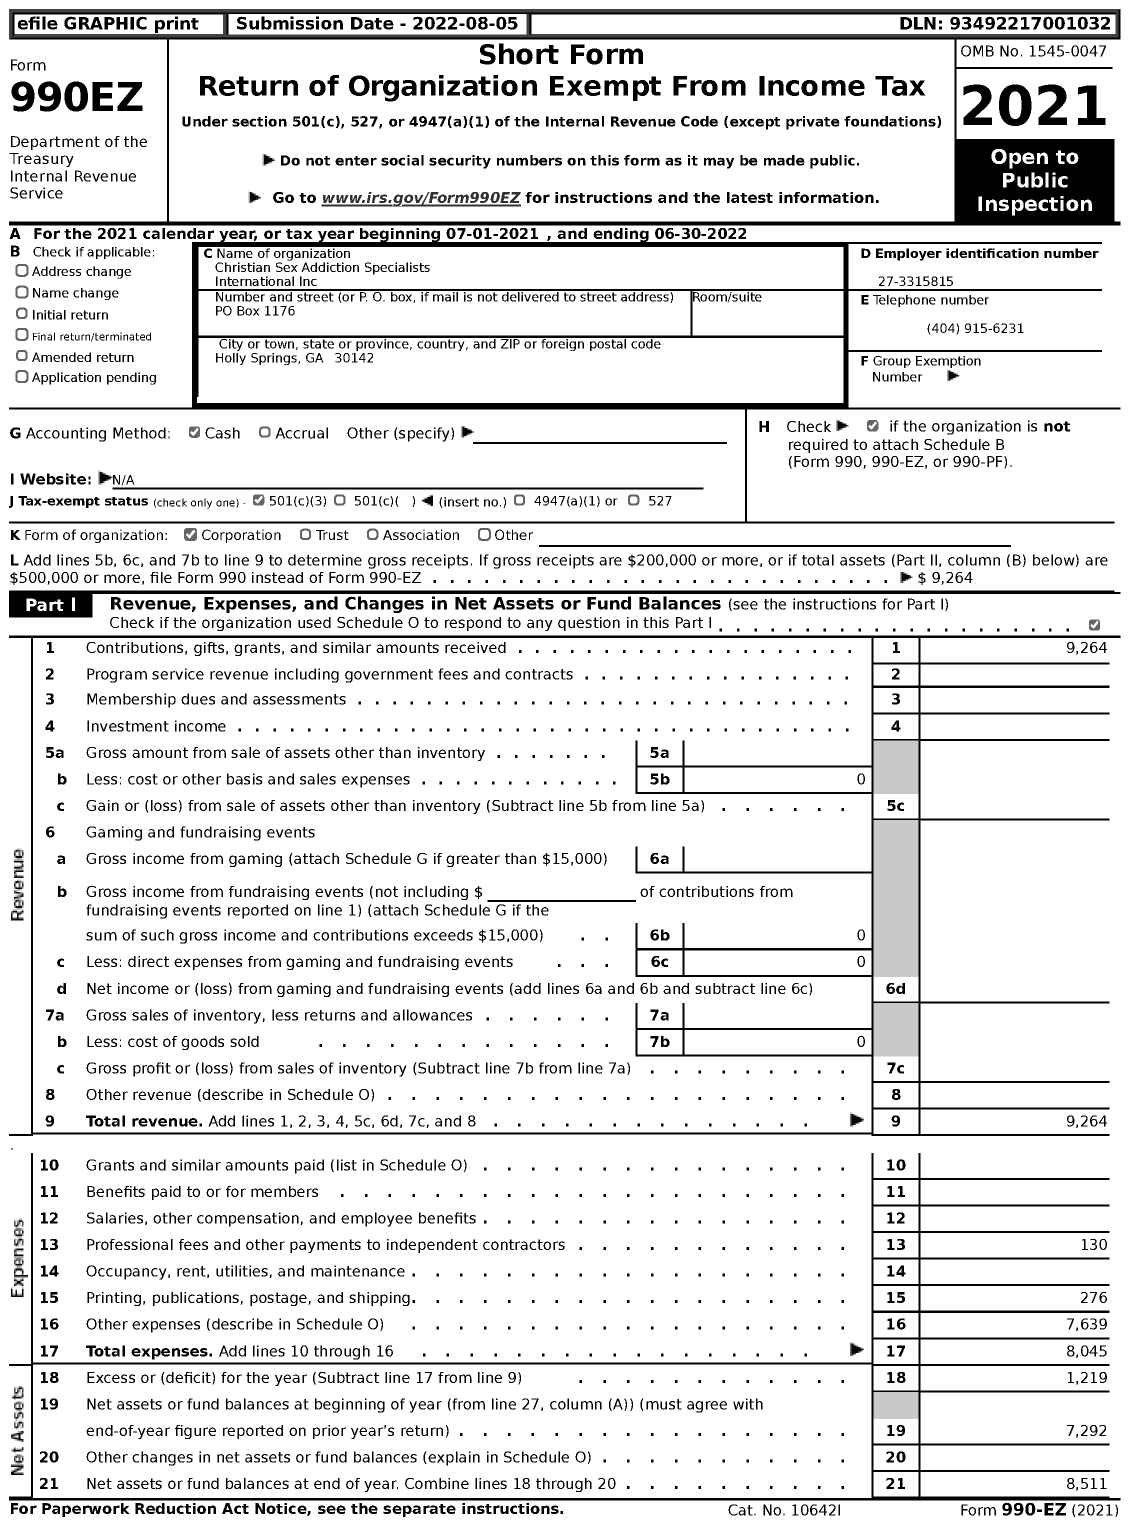 Image of first page of 2021 Form 990EZ for Christian Sex Addiction Specialists